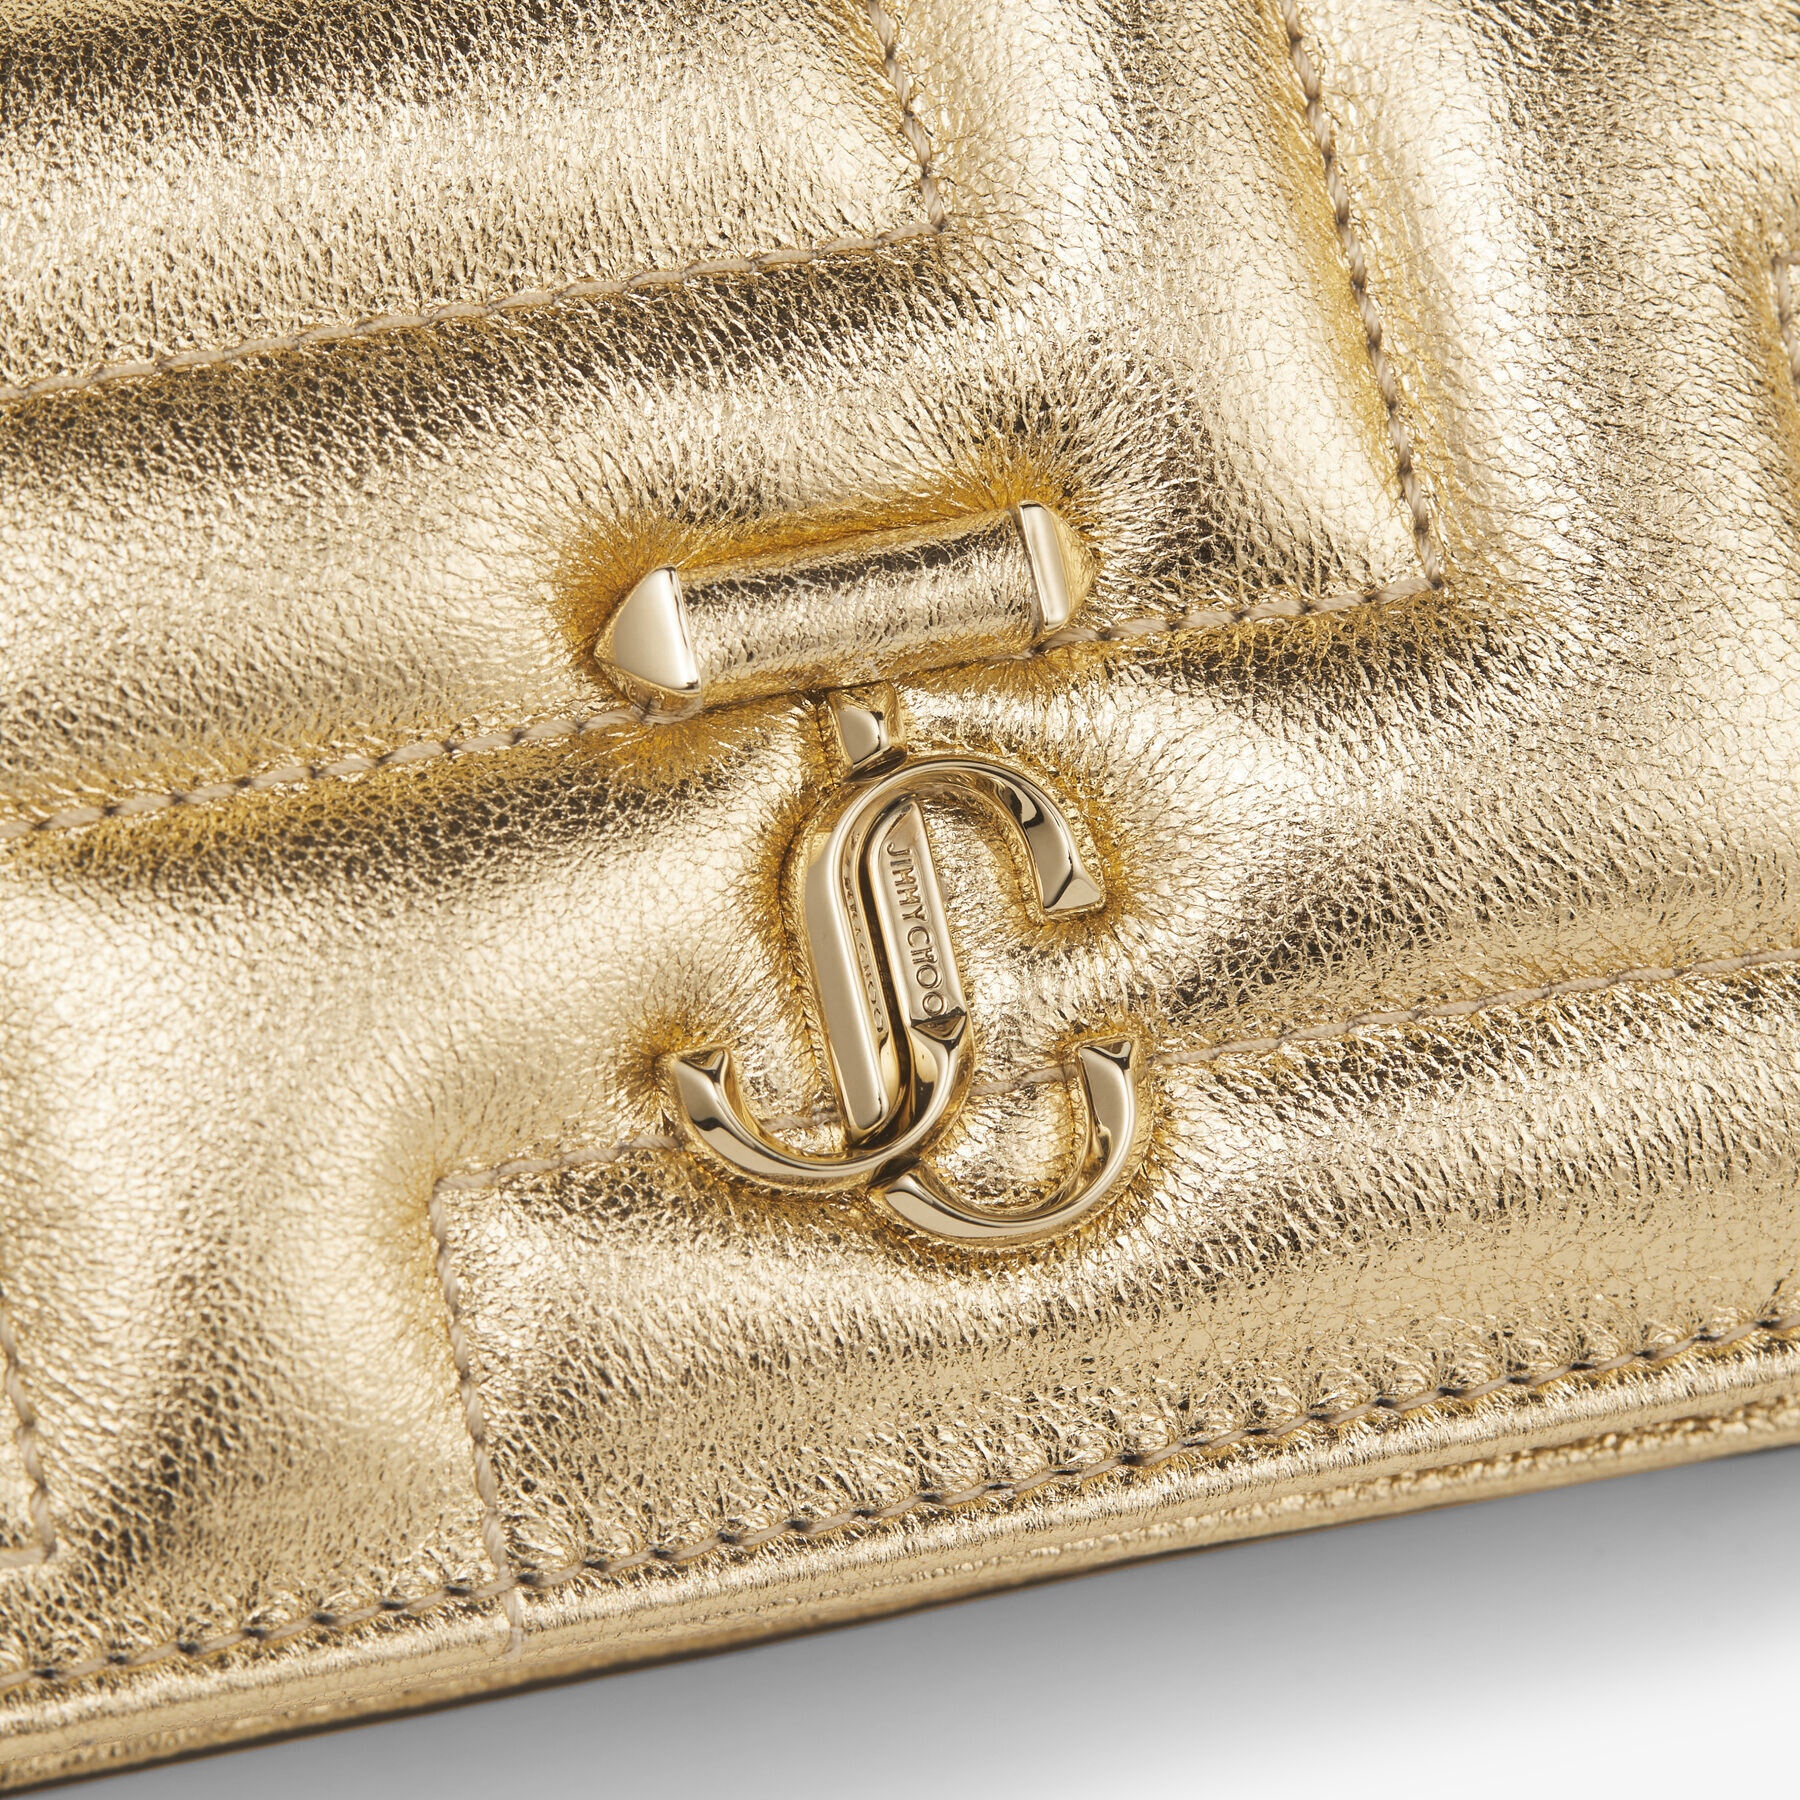 Hanne
Gold Quilted Metallic Nappa Leather Wallet with Light Gold JC Emblem - 4